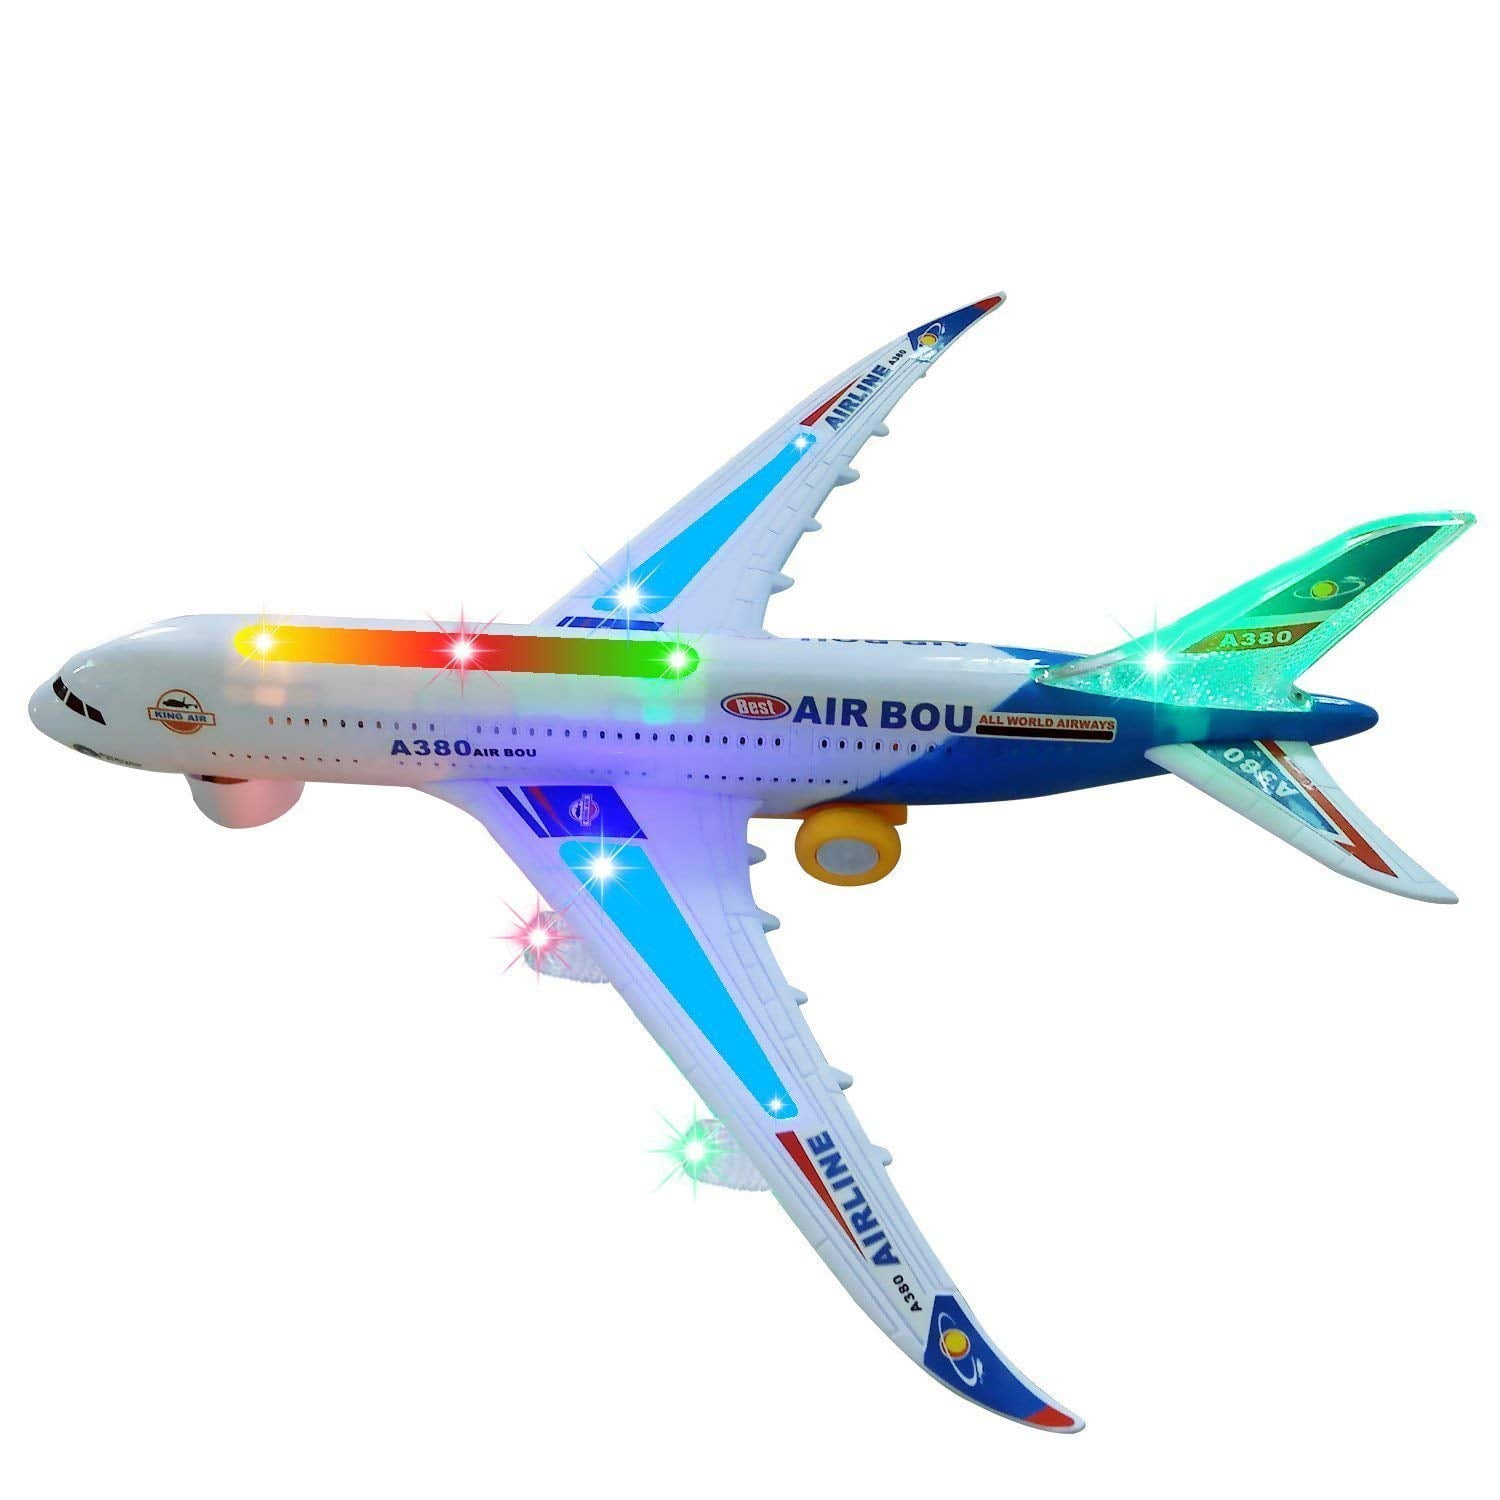 Zviku Kids Airplane A380 Toy Plane Self Driving Bump & go Airbus Great Gift Toy for Boys & Girls Age 2-8 Years Old Changes Direction On Contact Contains Beautiful 3D Light and Jet Engine 